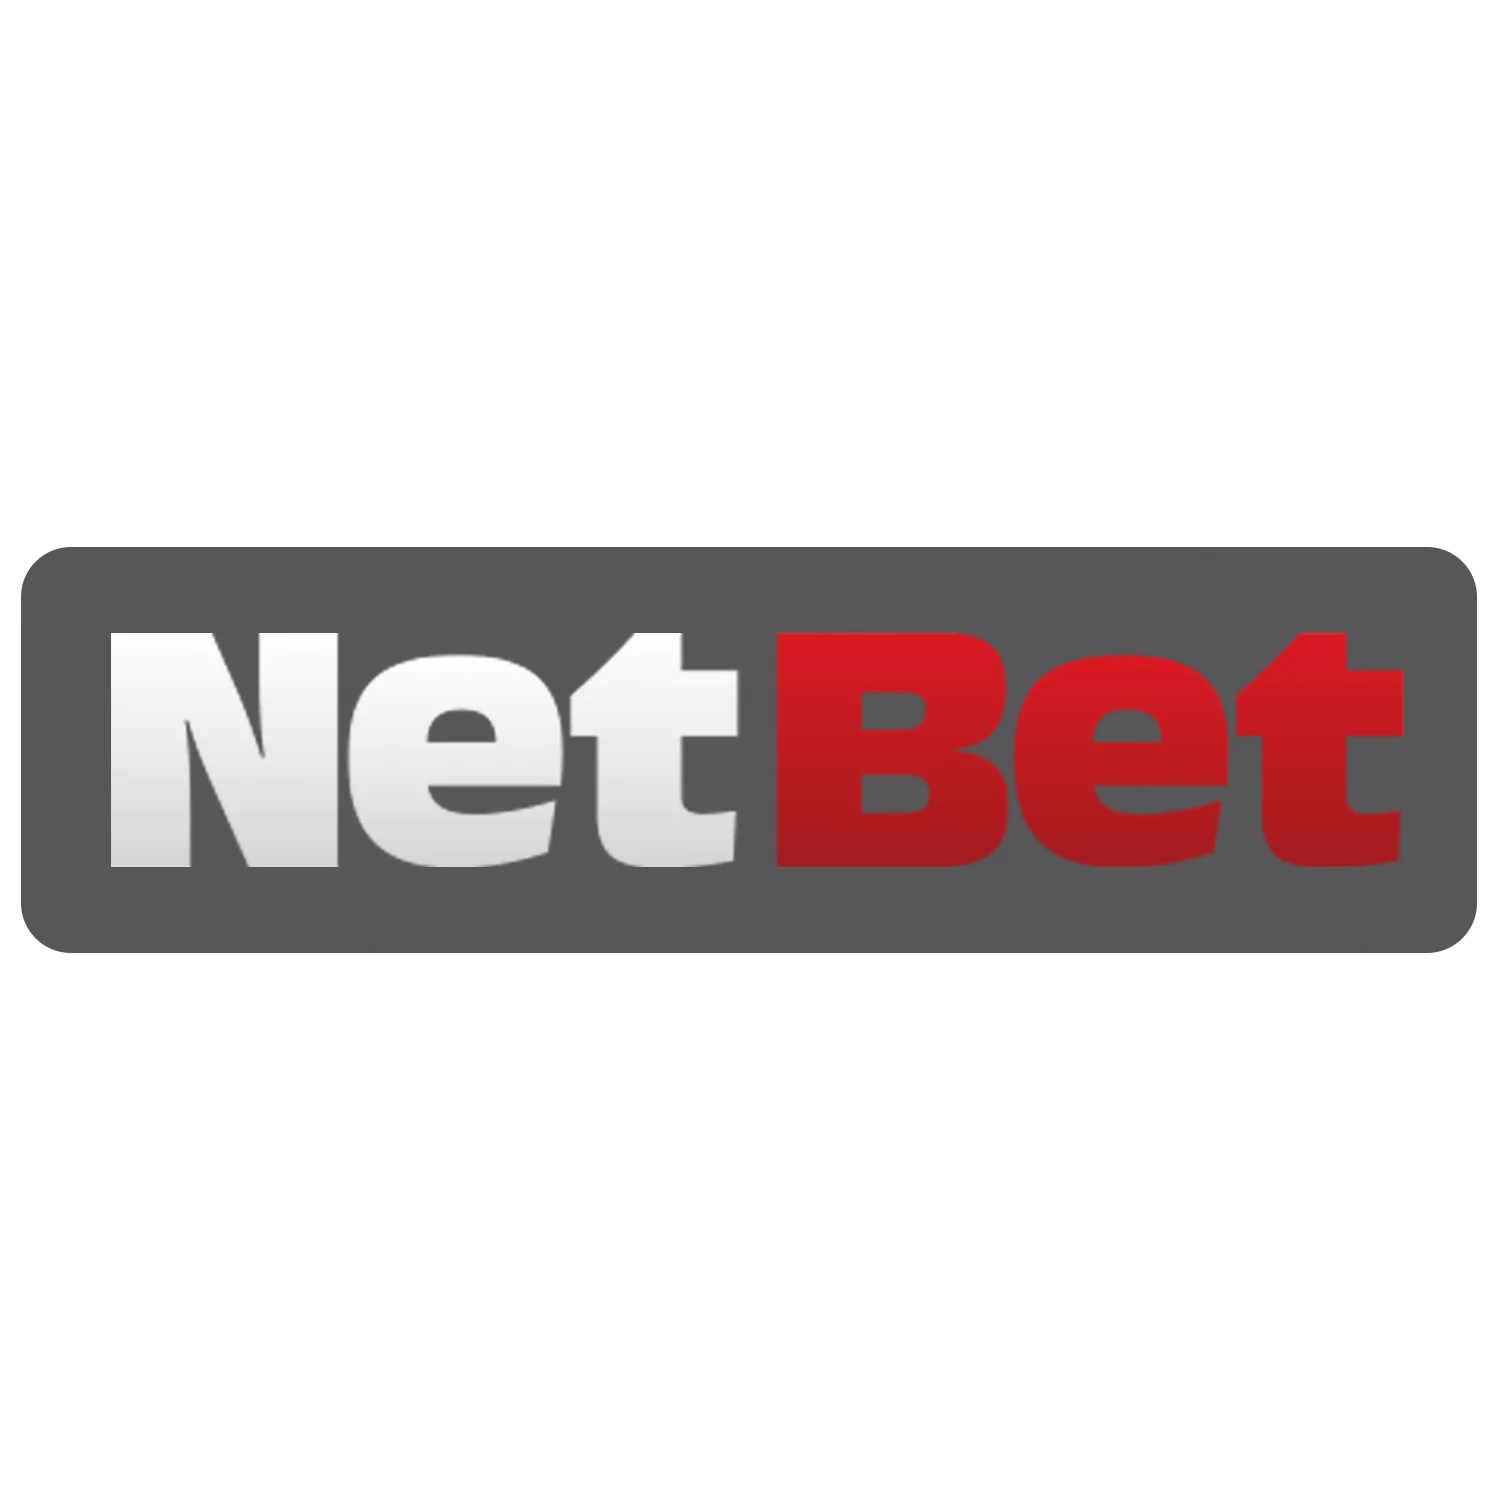 Learn how to sign up and play on the NetBet site.